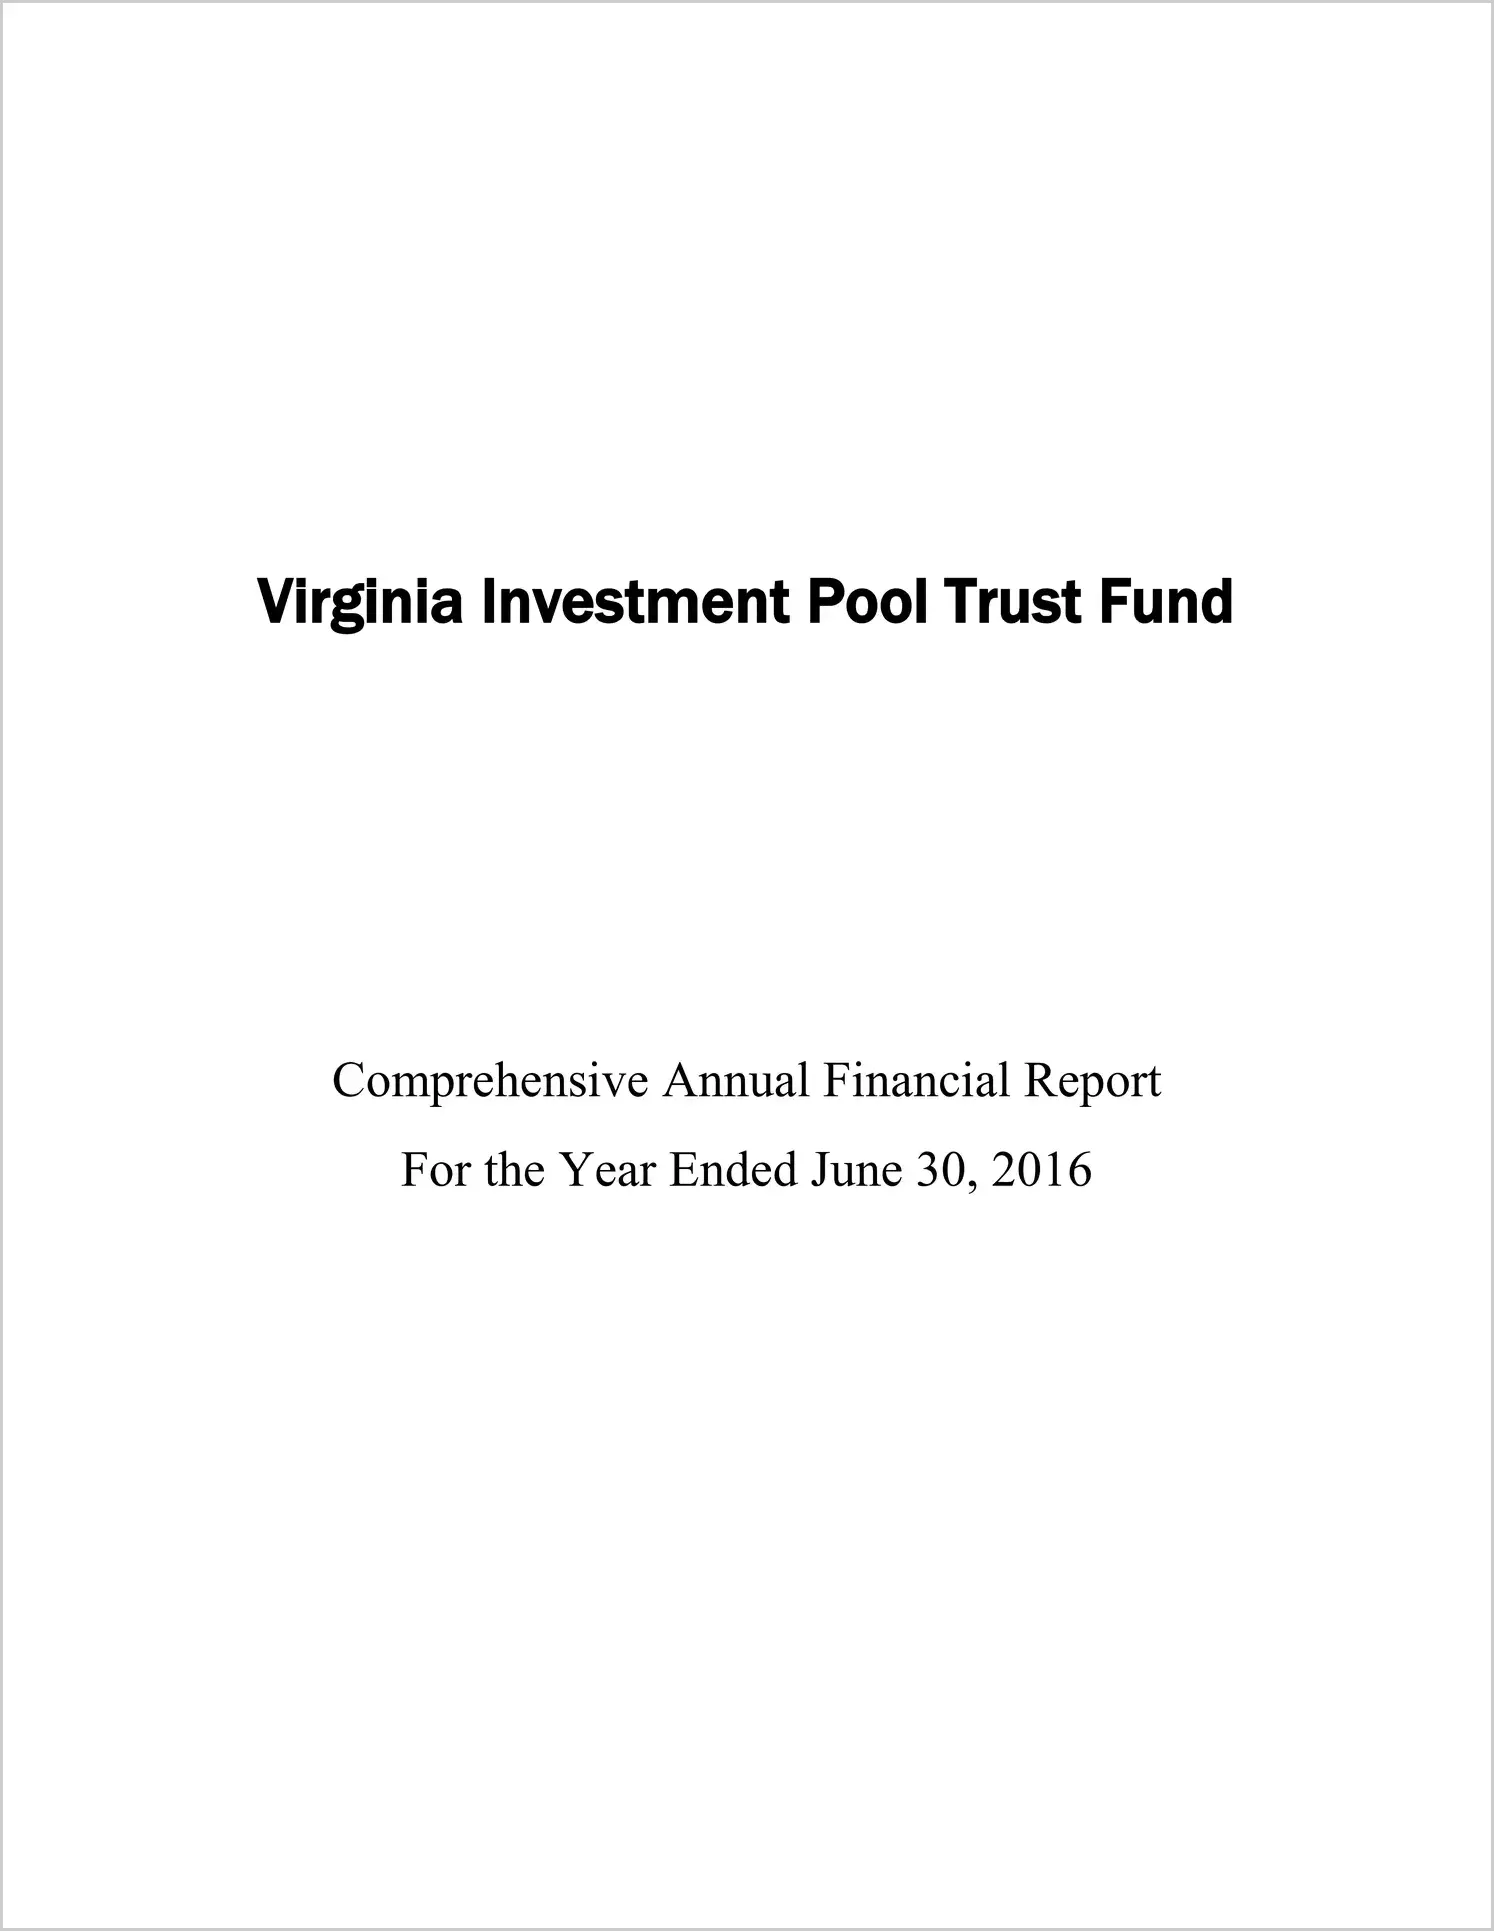 2016 ABC/Other Annual Financial Report  for Virginia Investment Pool Trust Fund